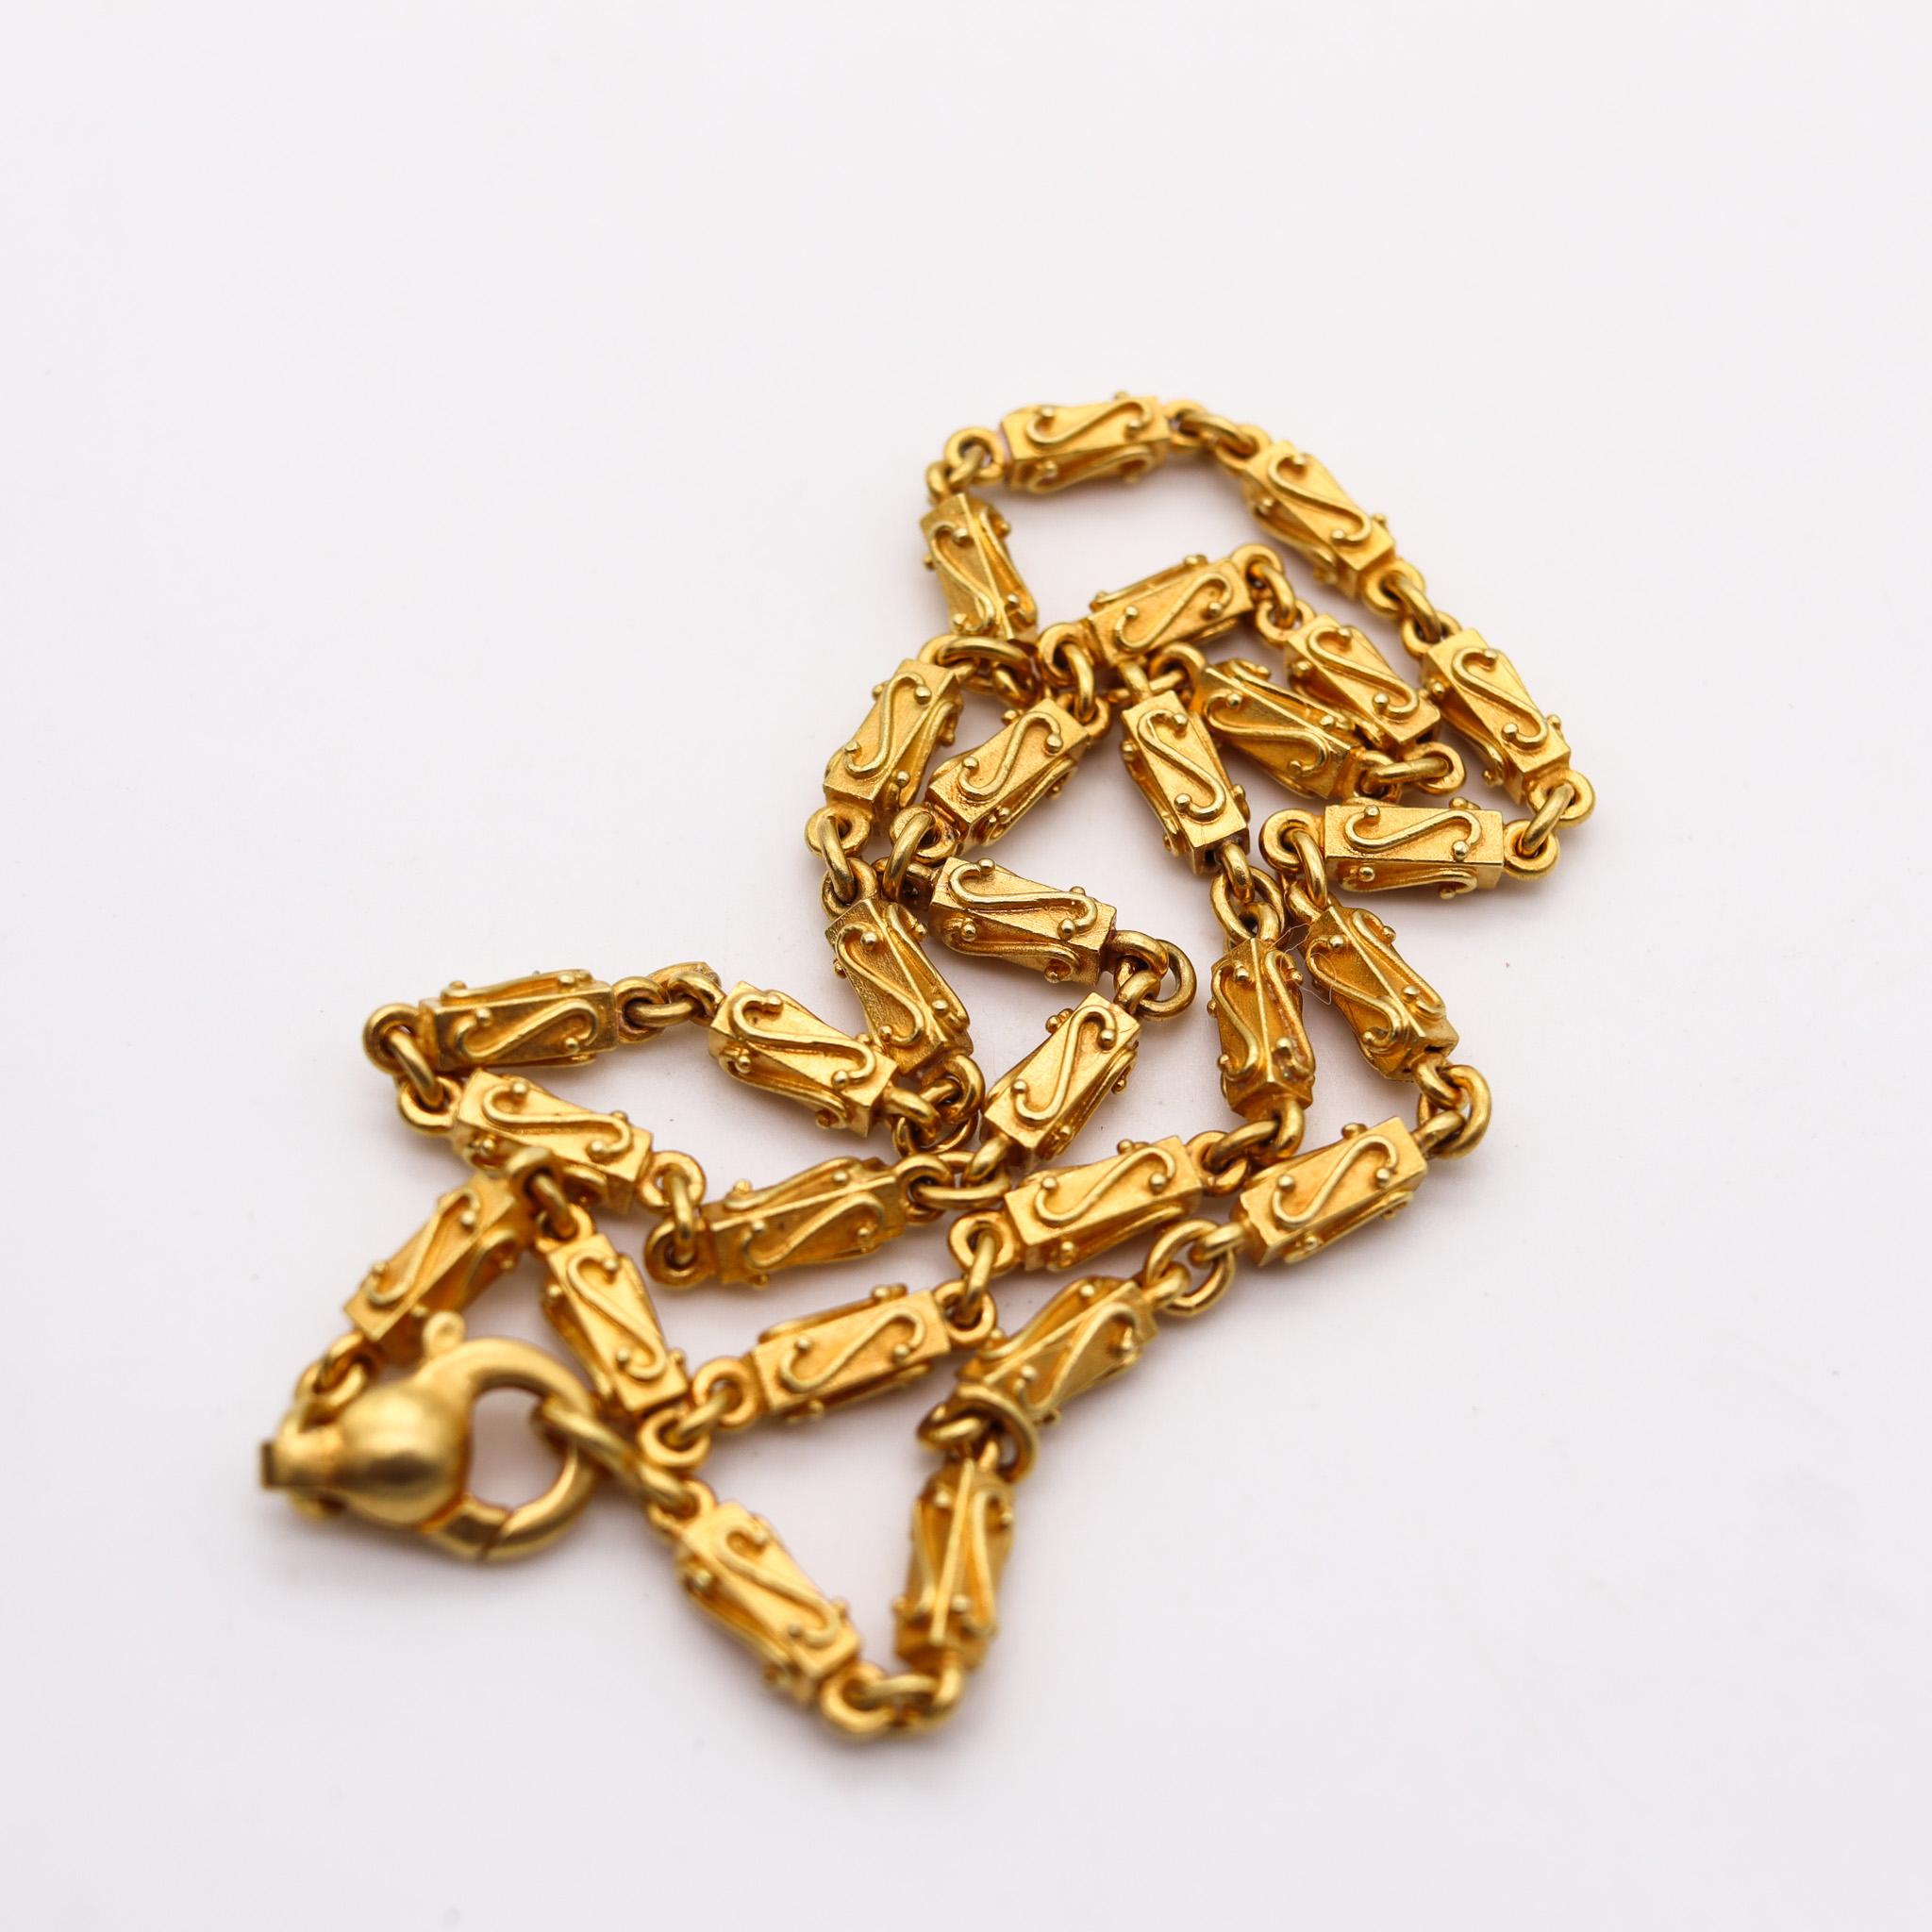 Etruscan Revival Vintage Italian Bold Chain Necklace in Solid 18Kt Yellow Gold For Sale 1